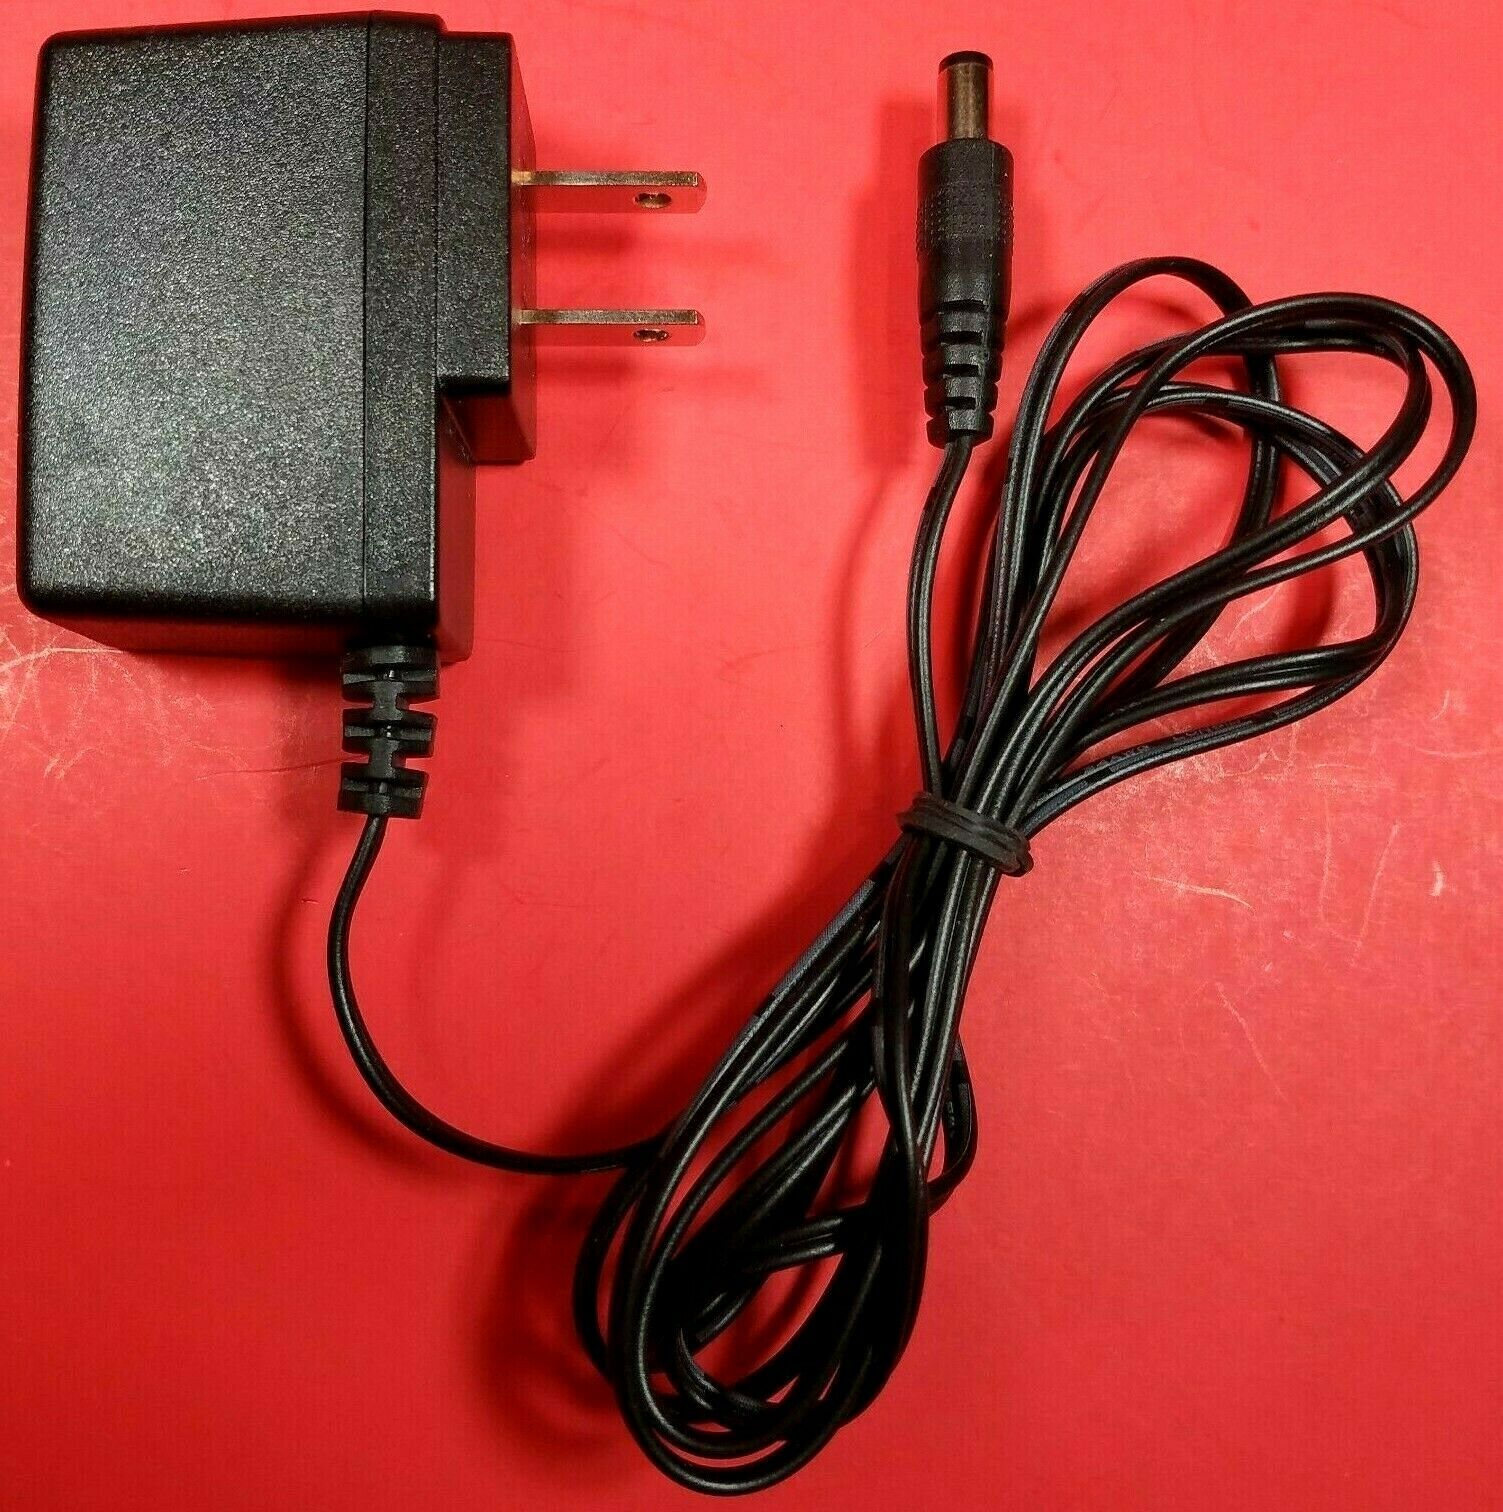 Genuine HAUTE POLISH MN-A105-L120 Power Supply Adaptor 5V - 1A OEM AC/DC Adapter Type: AC Power Adapter Output Voltage